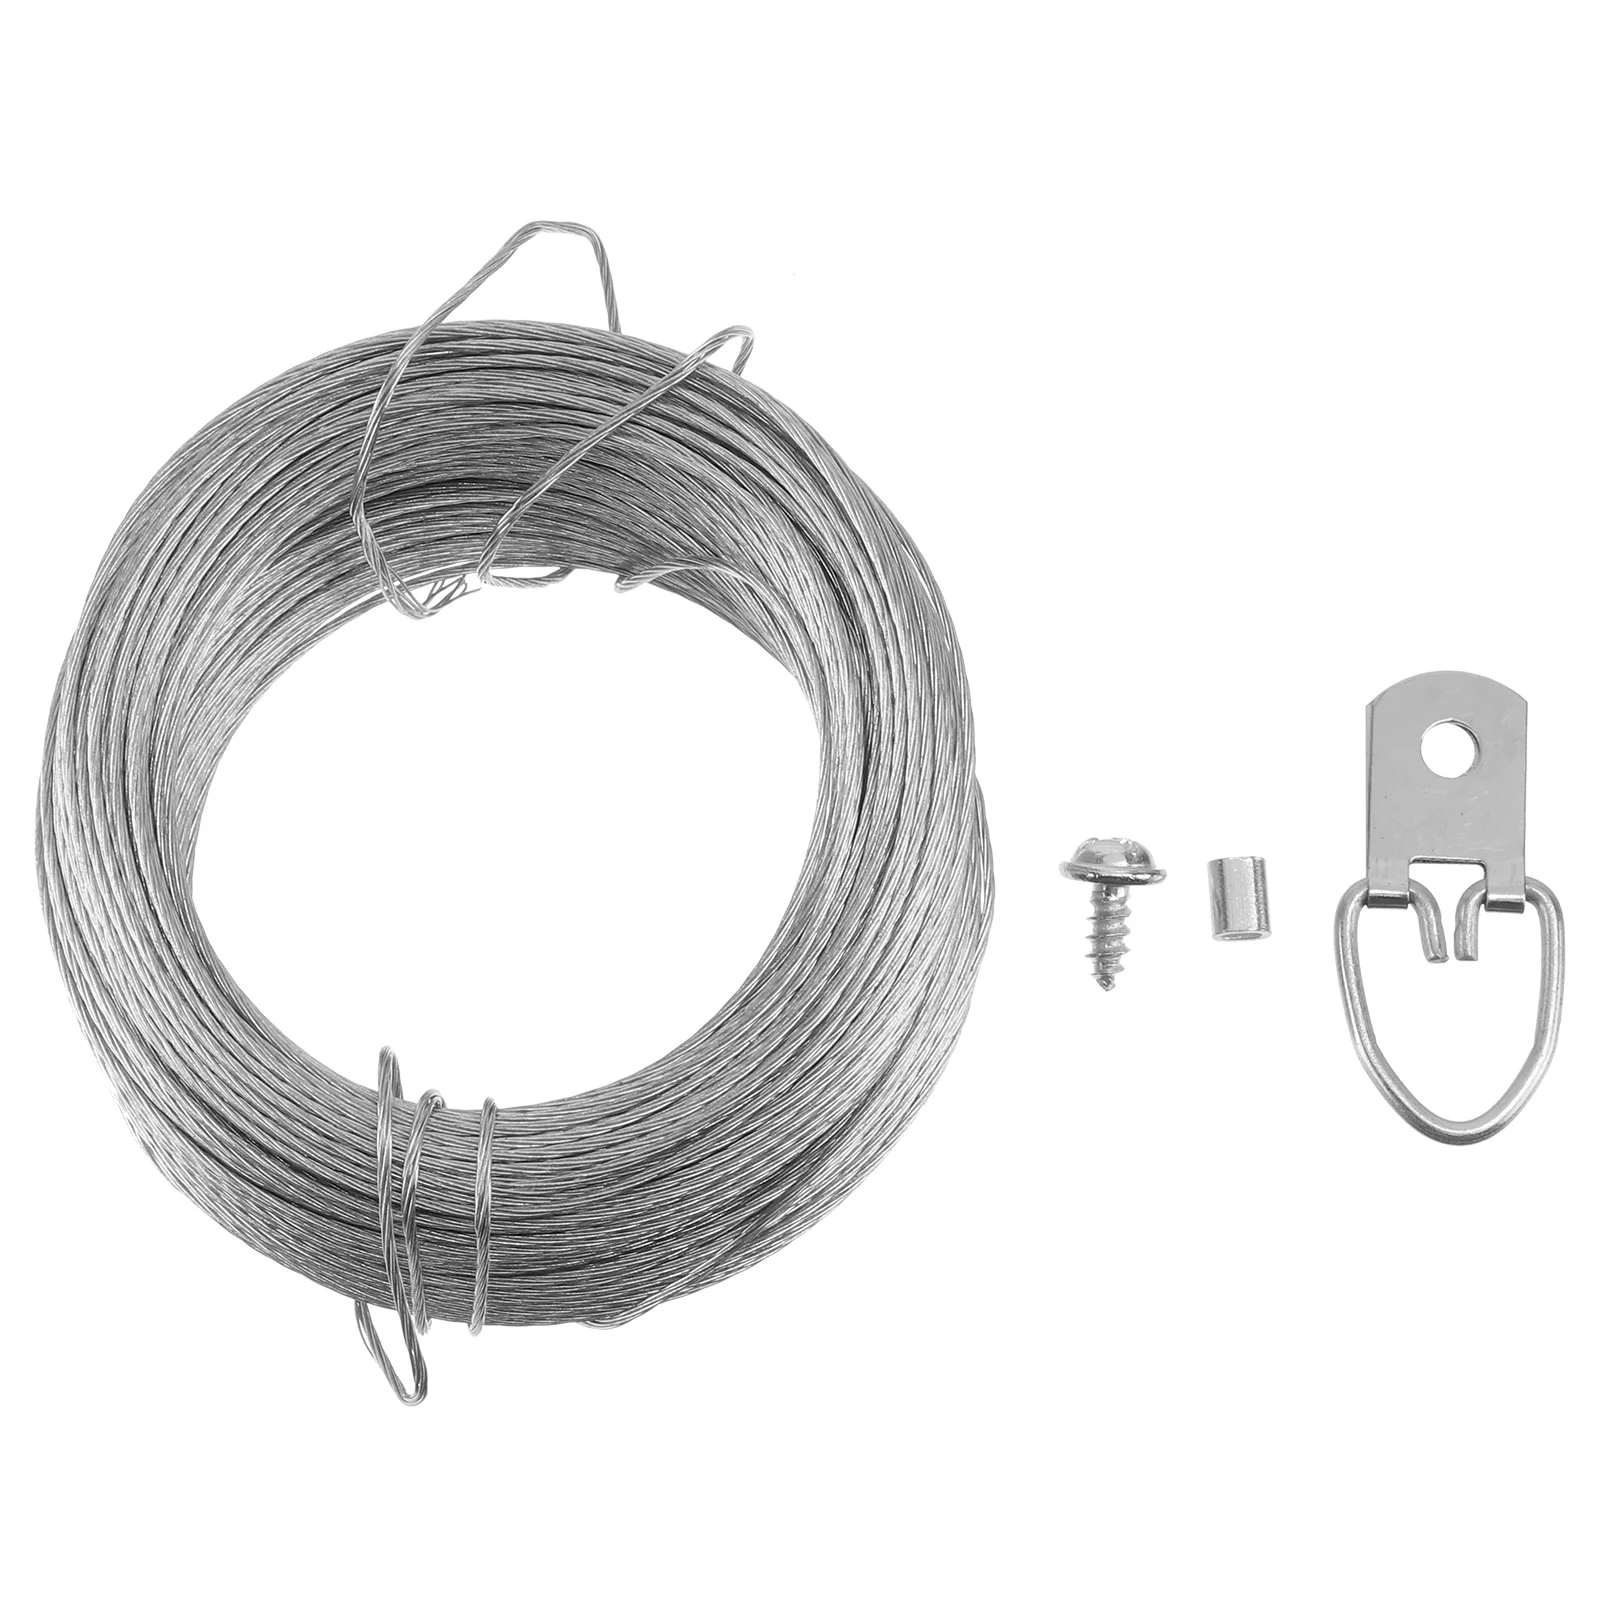 

Picture Hanging Wire, D Ring Picture Hangers with Screws and Wire ( 20m Wire Rope+ 20 Sets of Rings )